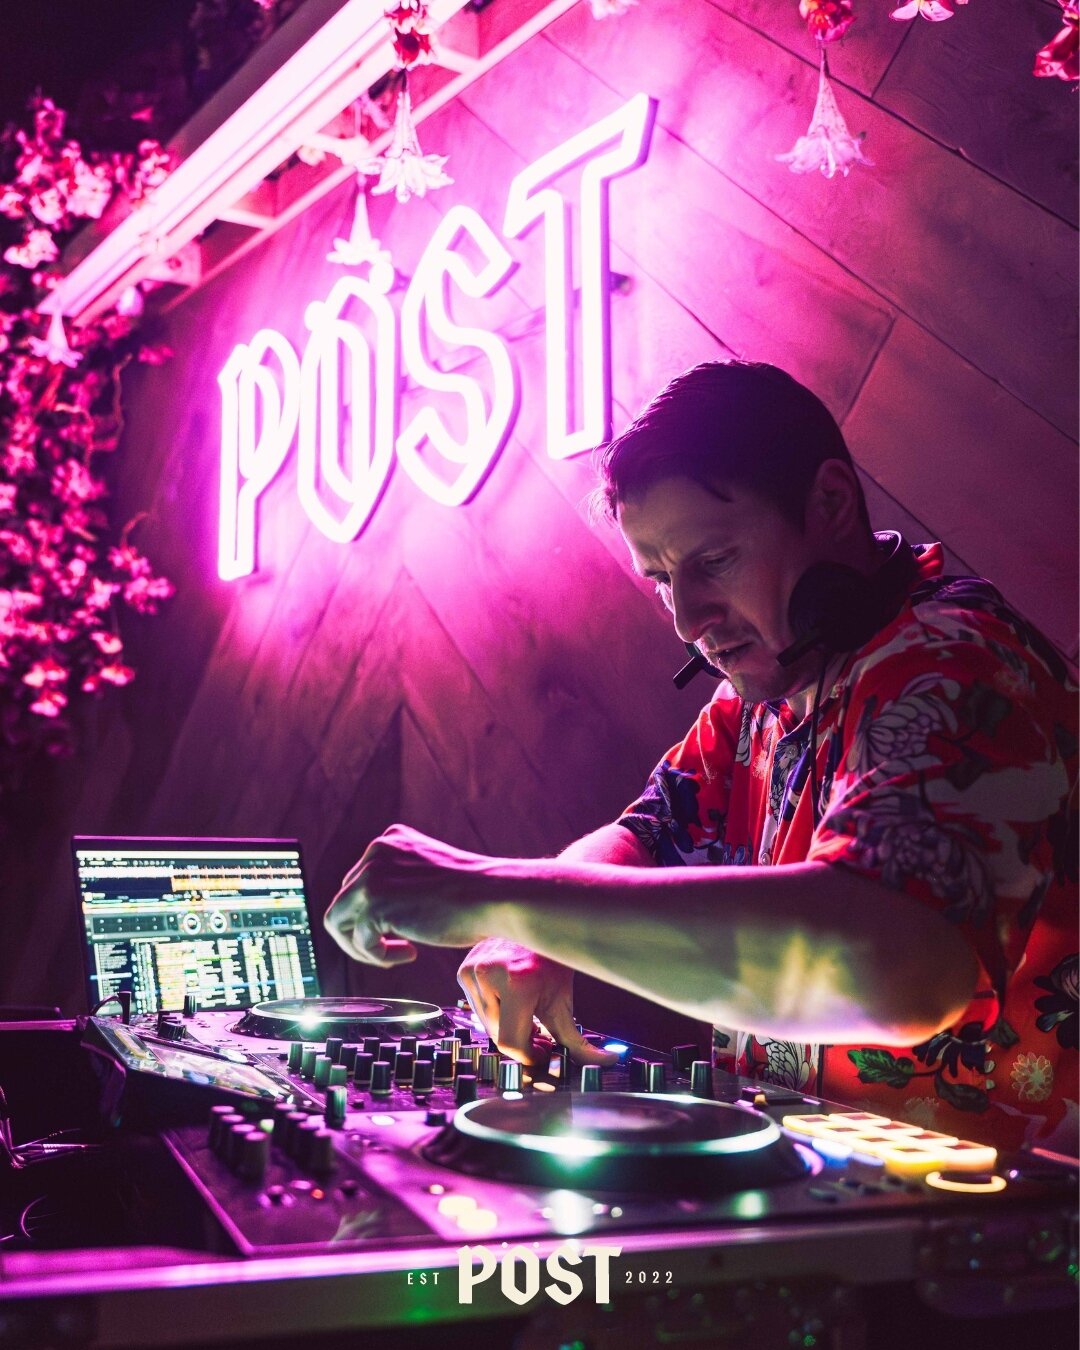 Are you ready to dance the night away?🕺

Join us tonight for our P&ouml;st It Saturdays!

#postbournemouth #bournemouthbar #lovebournemouth #livemusic